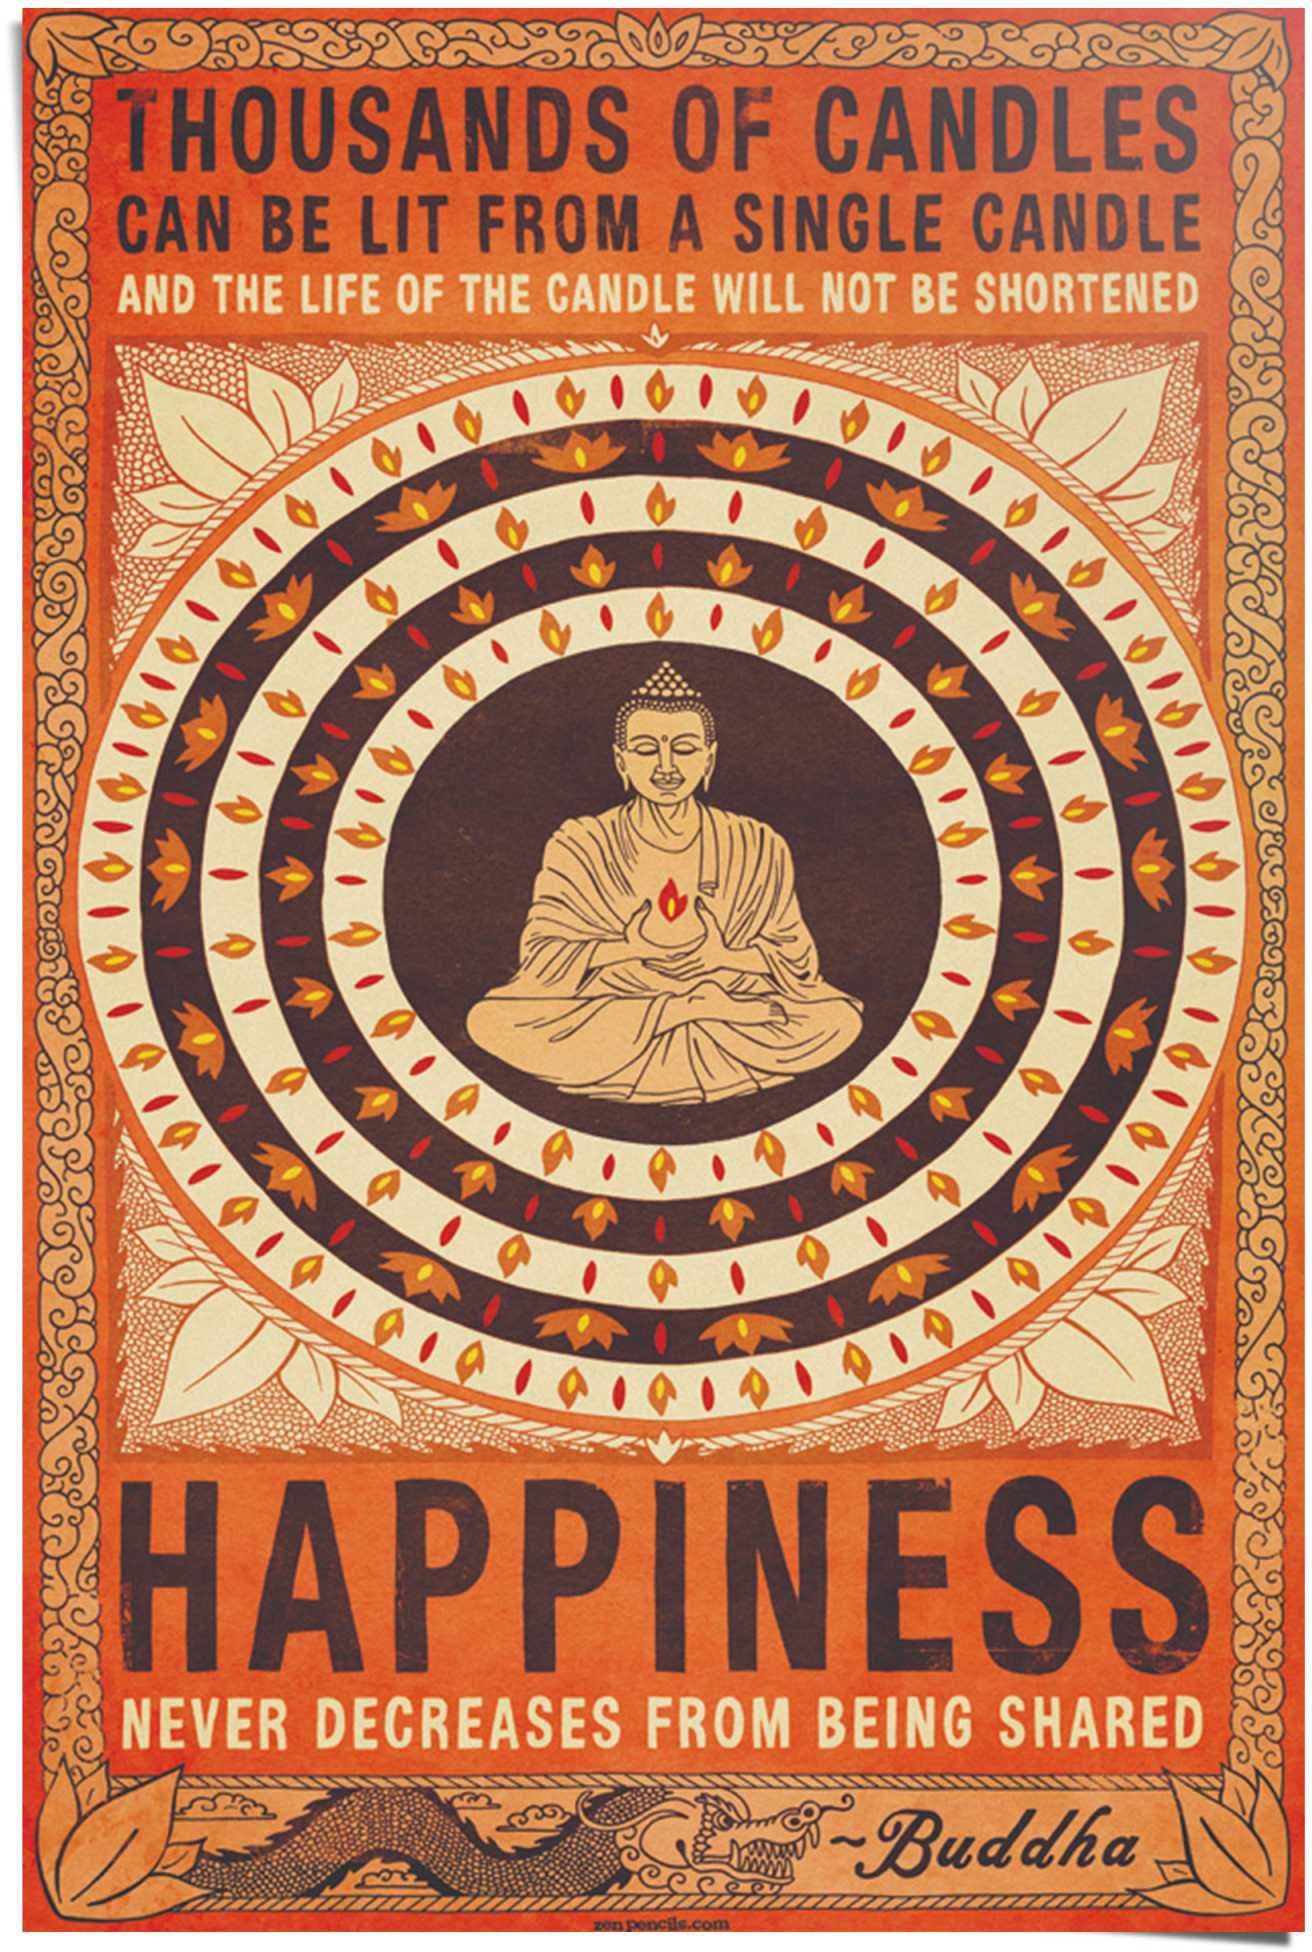 St) (1 Buddha Poster Reinders! Happiness,